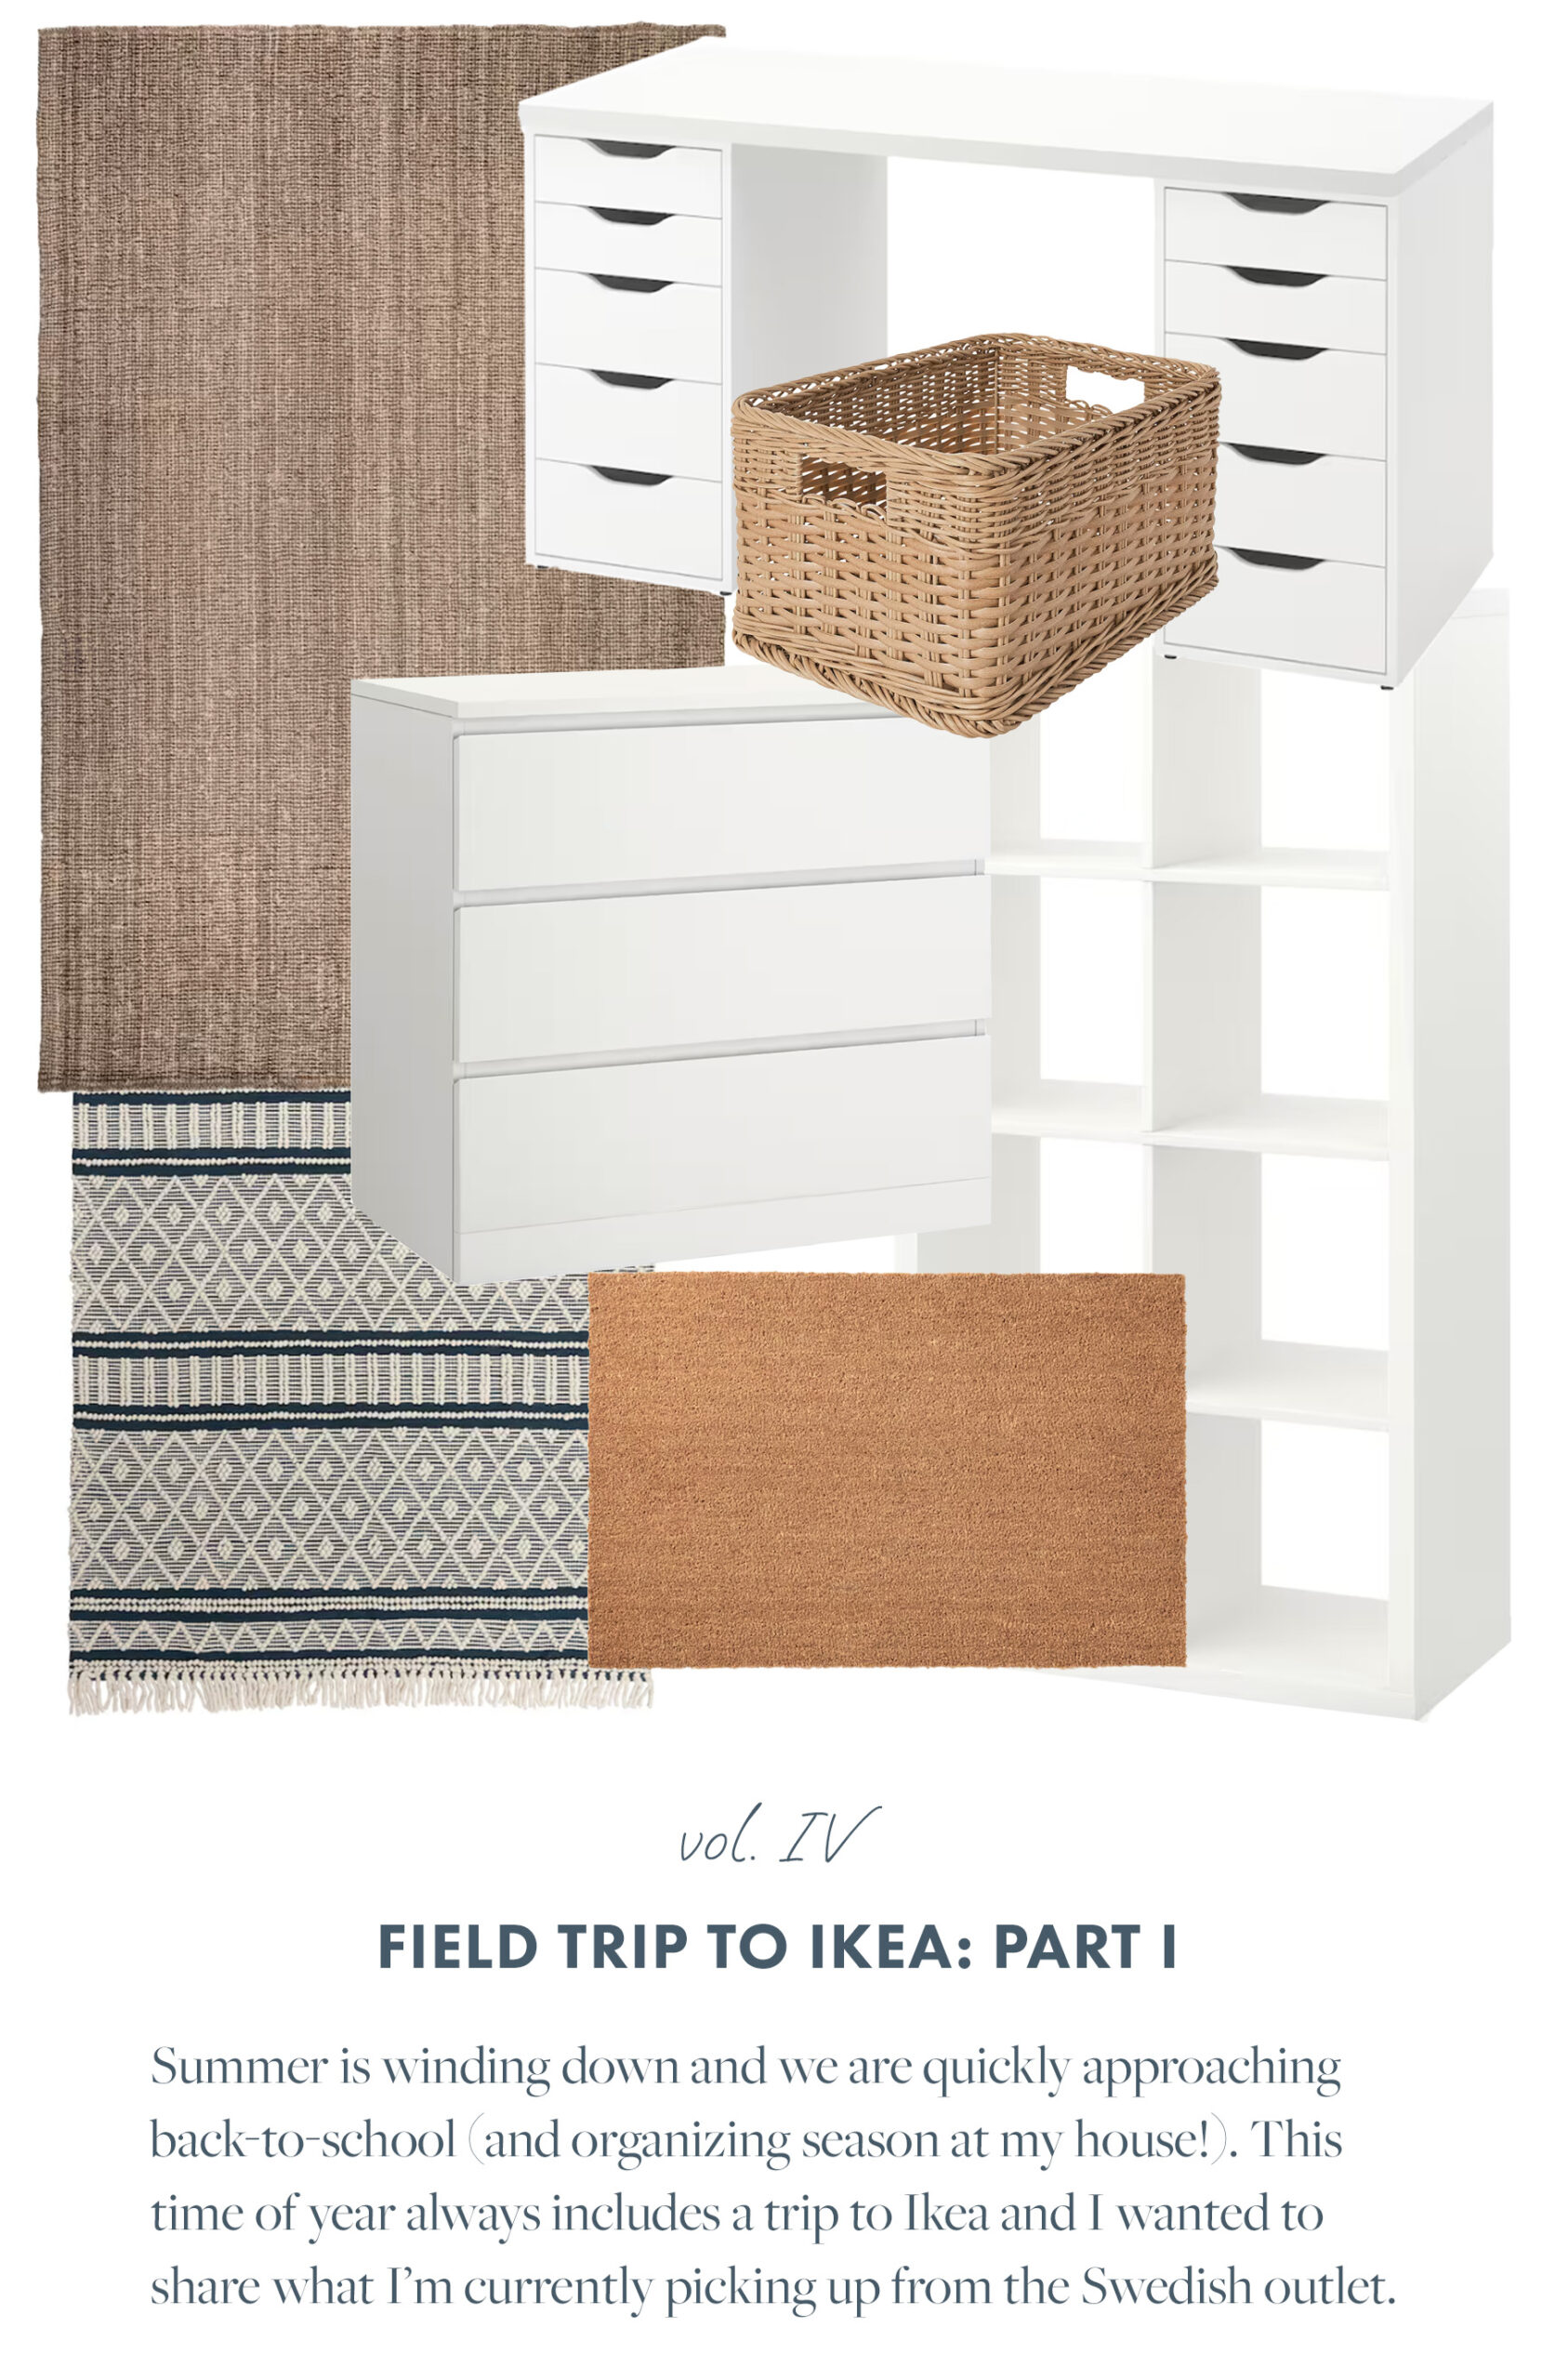 Vol. 3: Field Trip to Ikea, Part I Summer is winding down and we are quickly approaching back-to-school (and organizing season at my house!). This time of year always includes a trip to Ikea and I wanted to share what I’m currently picking up from the Swedish outlet. 